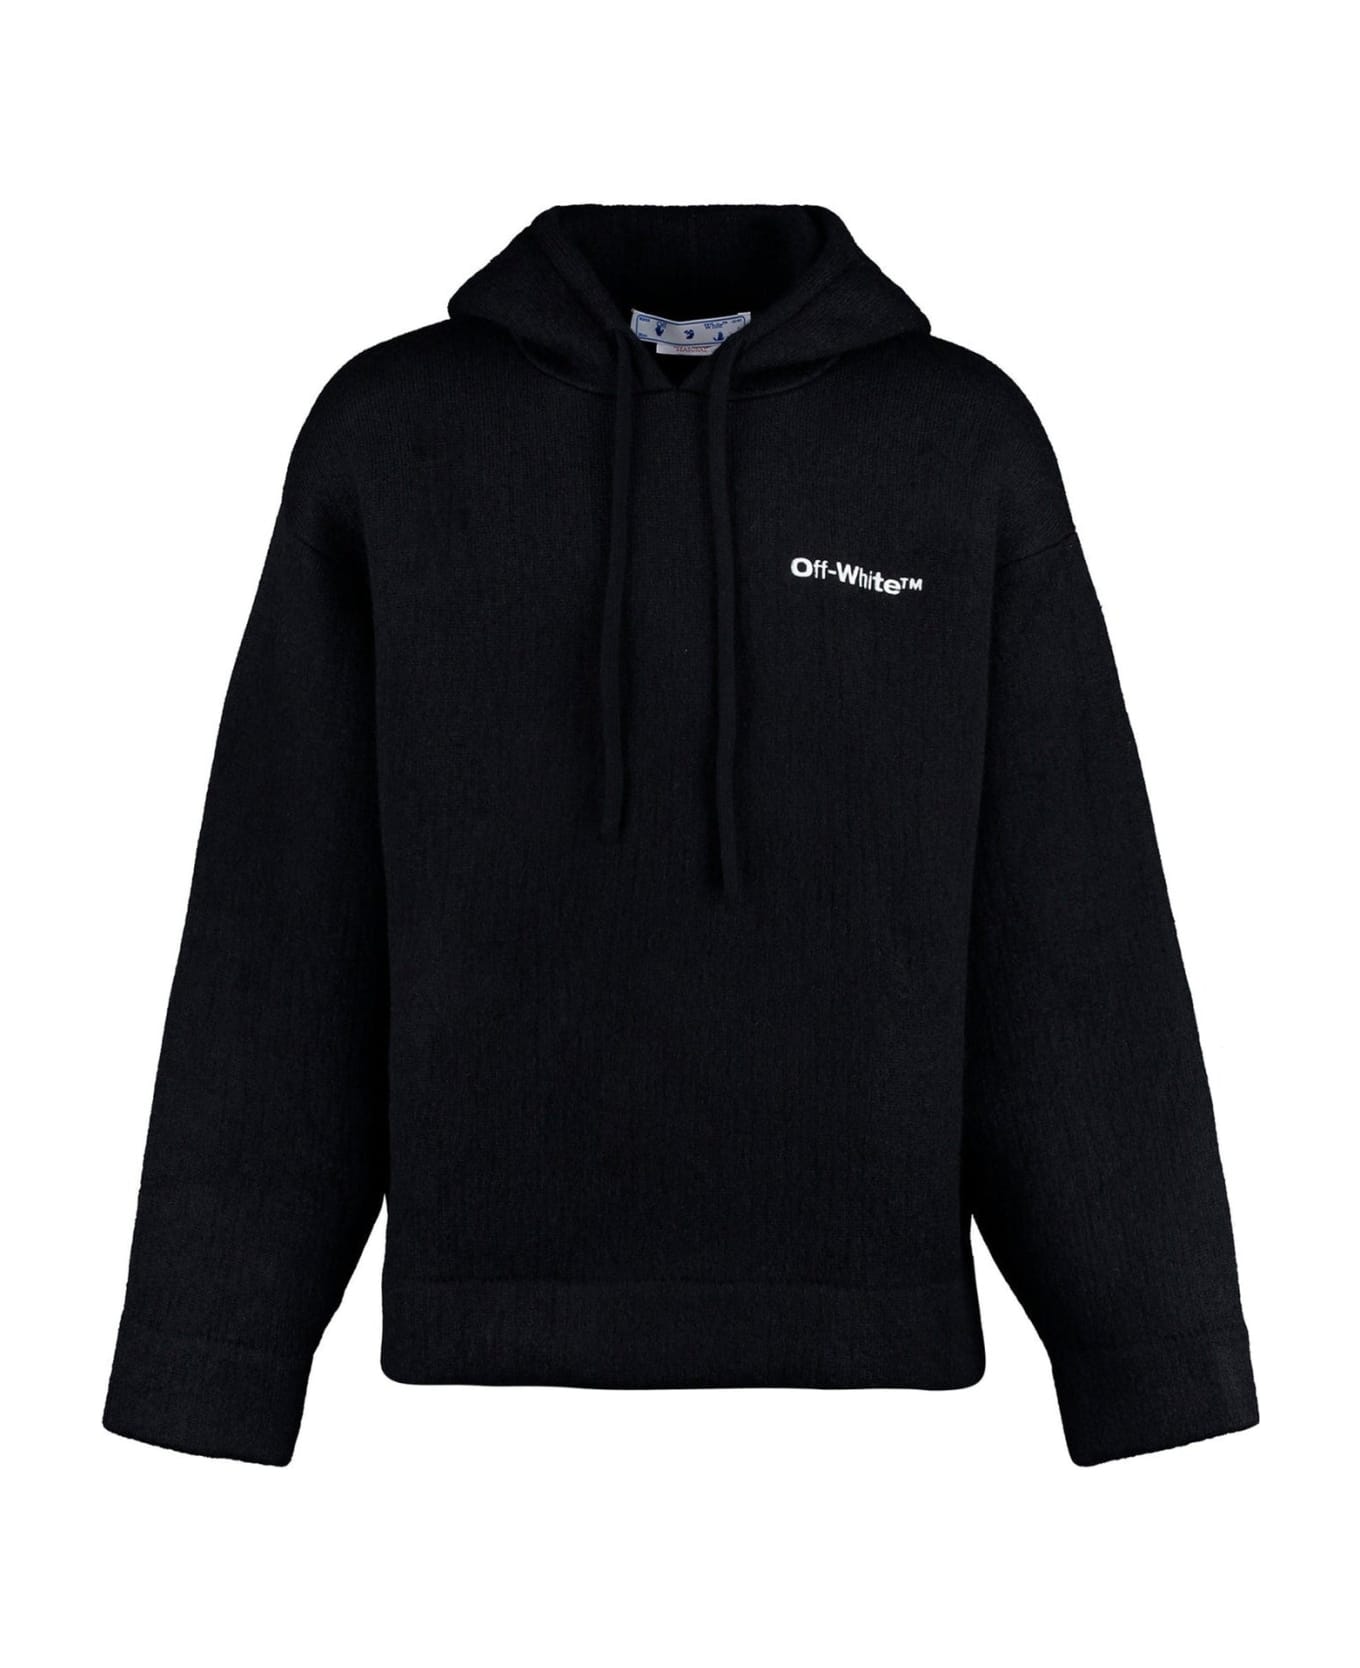 Off-White Knitted Hoodie - Black フリース